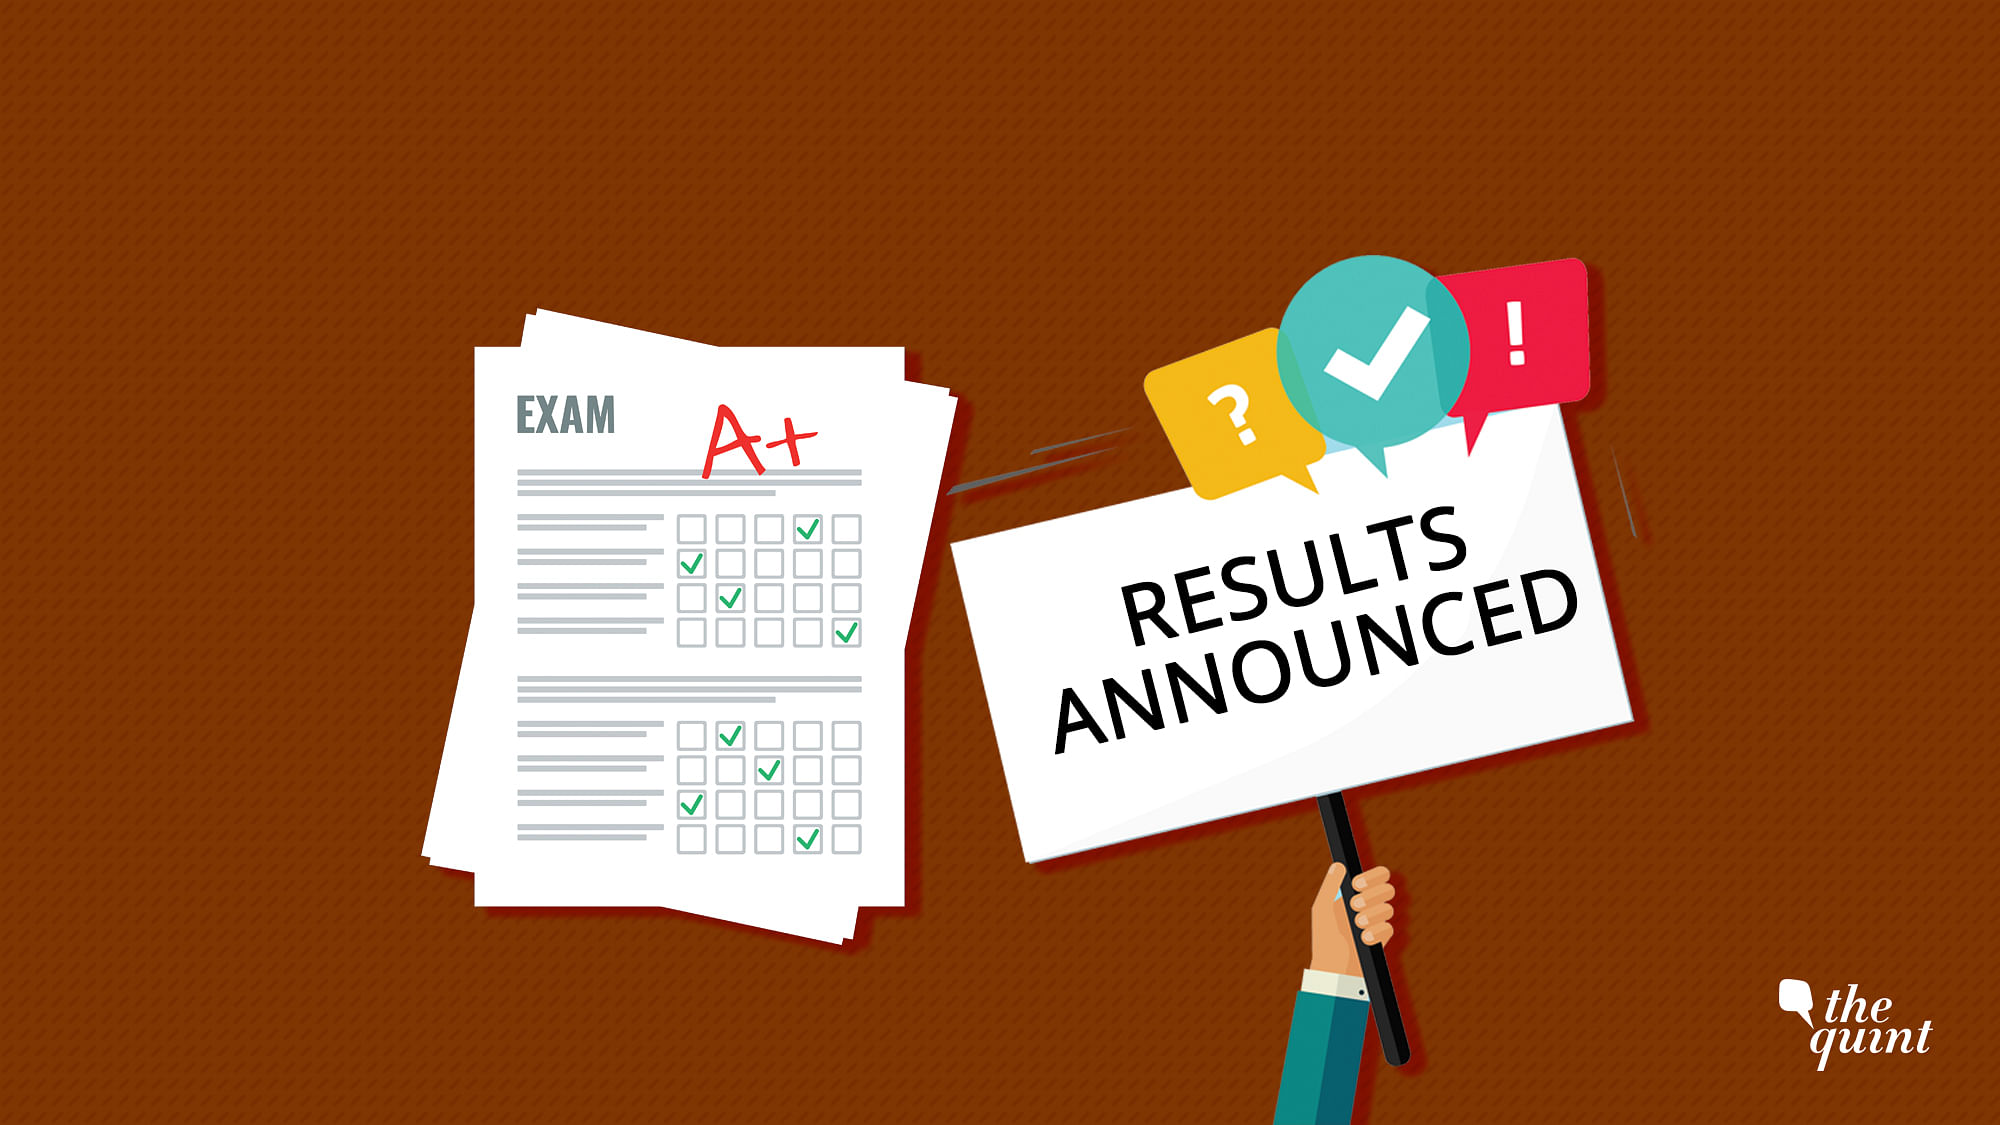 RBSE, Rajasthan Class 12th Result 2019: Rajasthan Board of Secondary education (RBSE) released Class 12 result today.